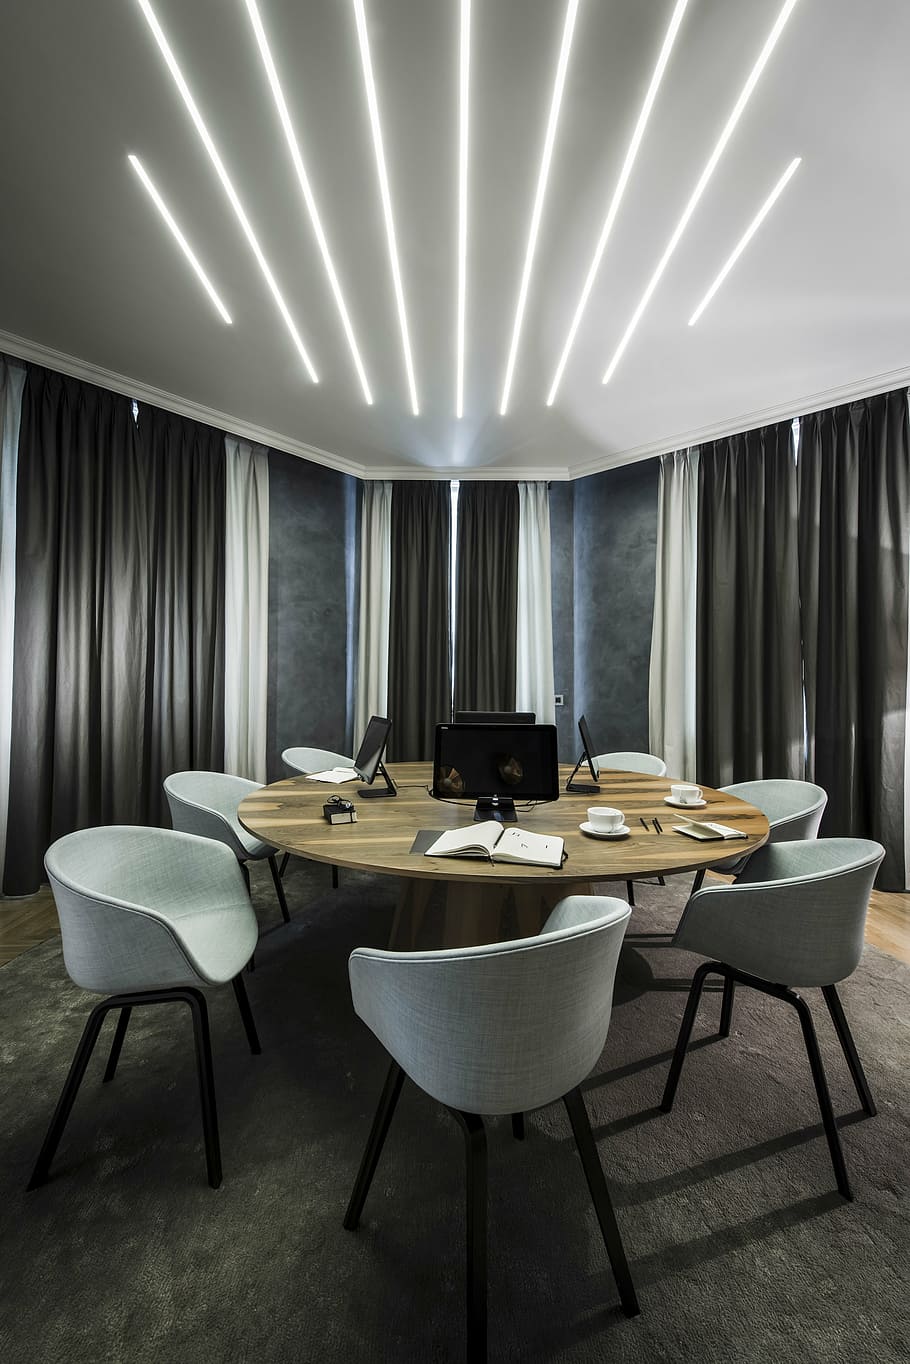 bella for, table, meeting room, reference, exklusive, unique, indoors, seat, chair, furniture